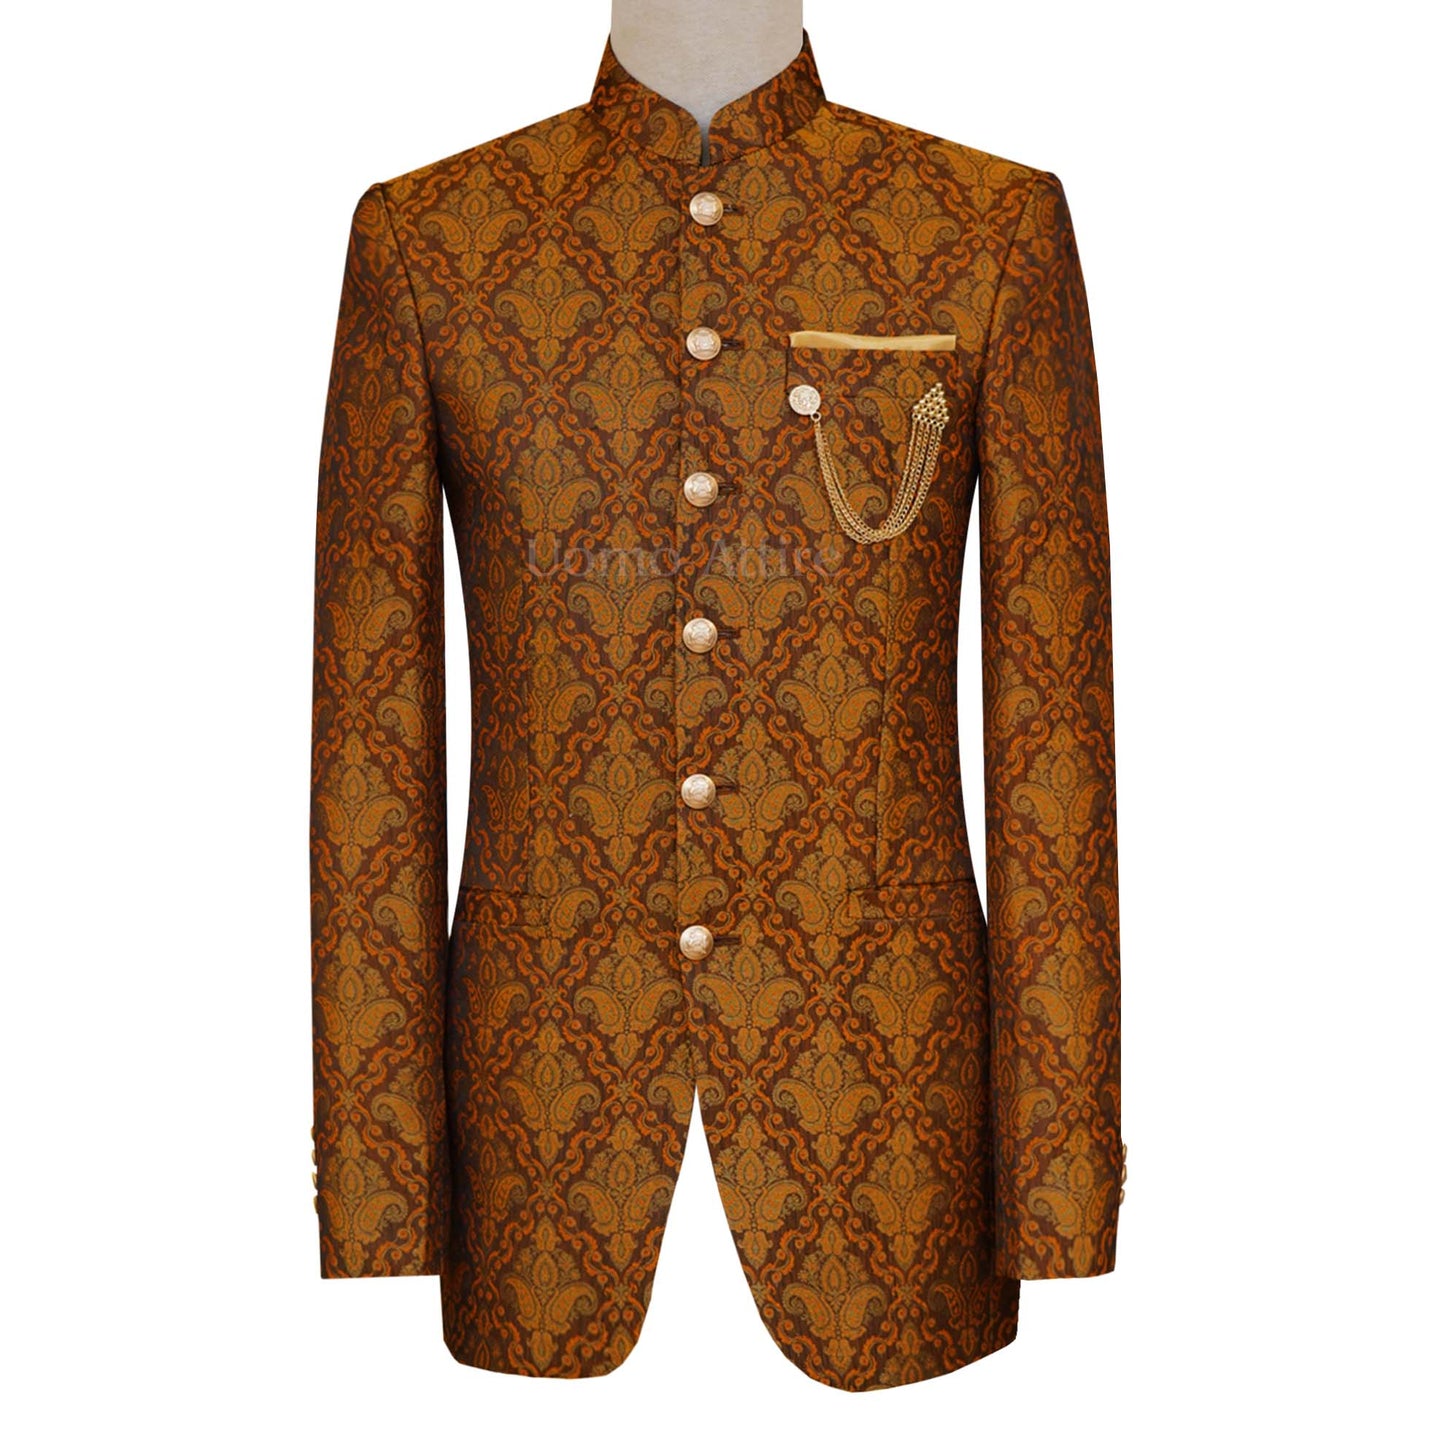 Rust Colored Slim Fit Prince Coat for a Colorful Event - Prince Coat